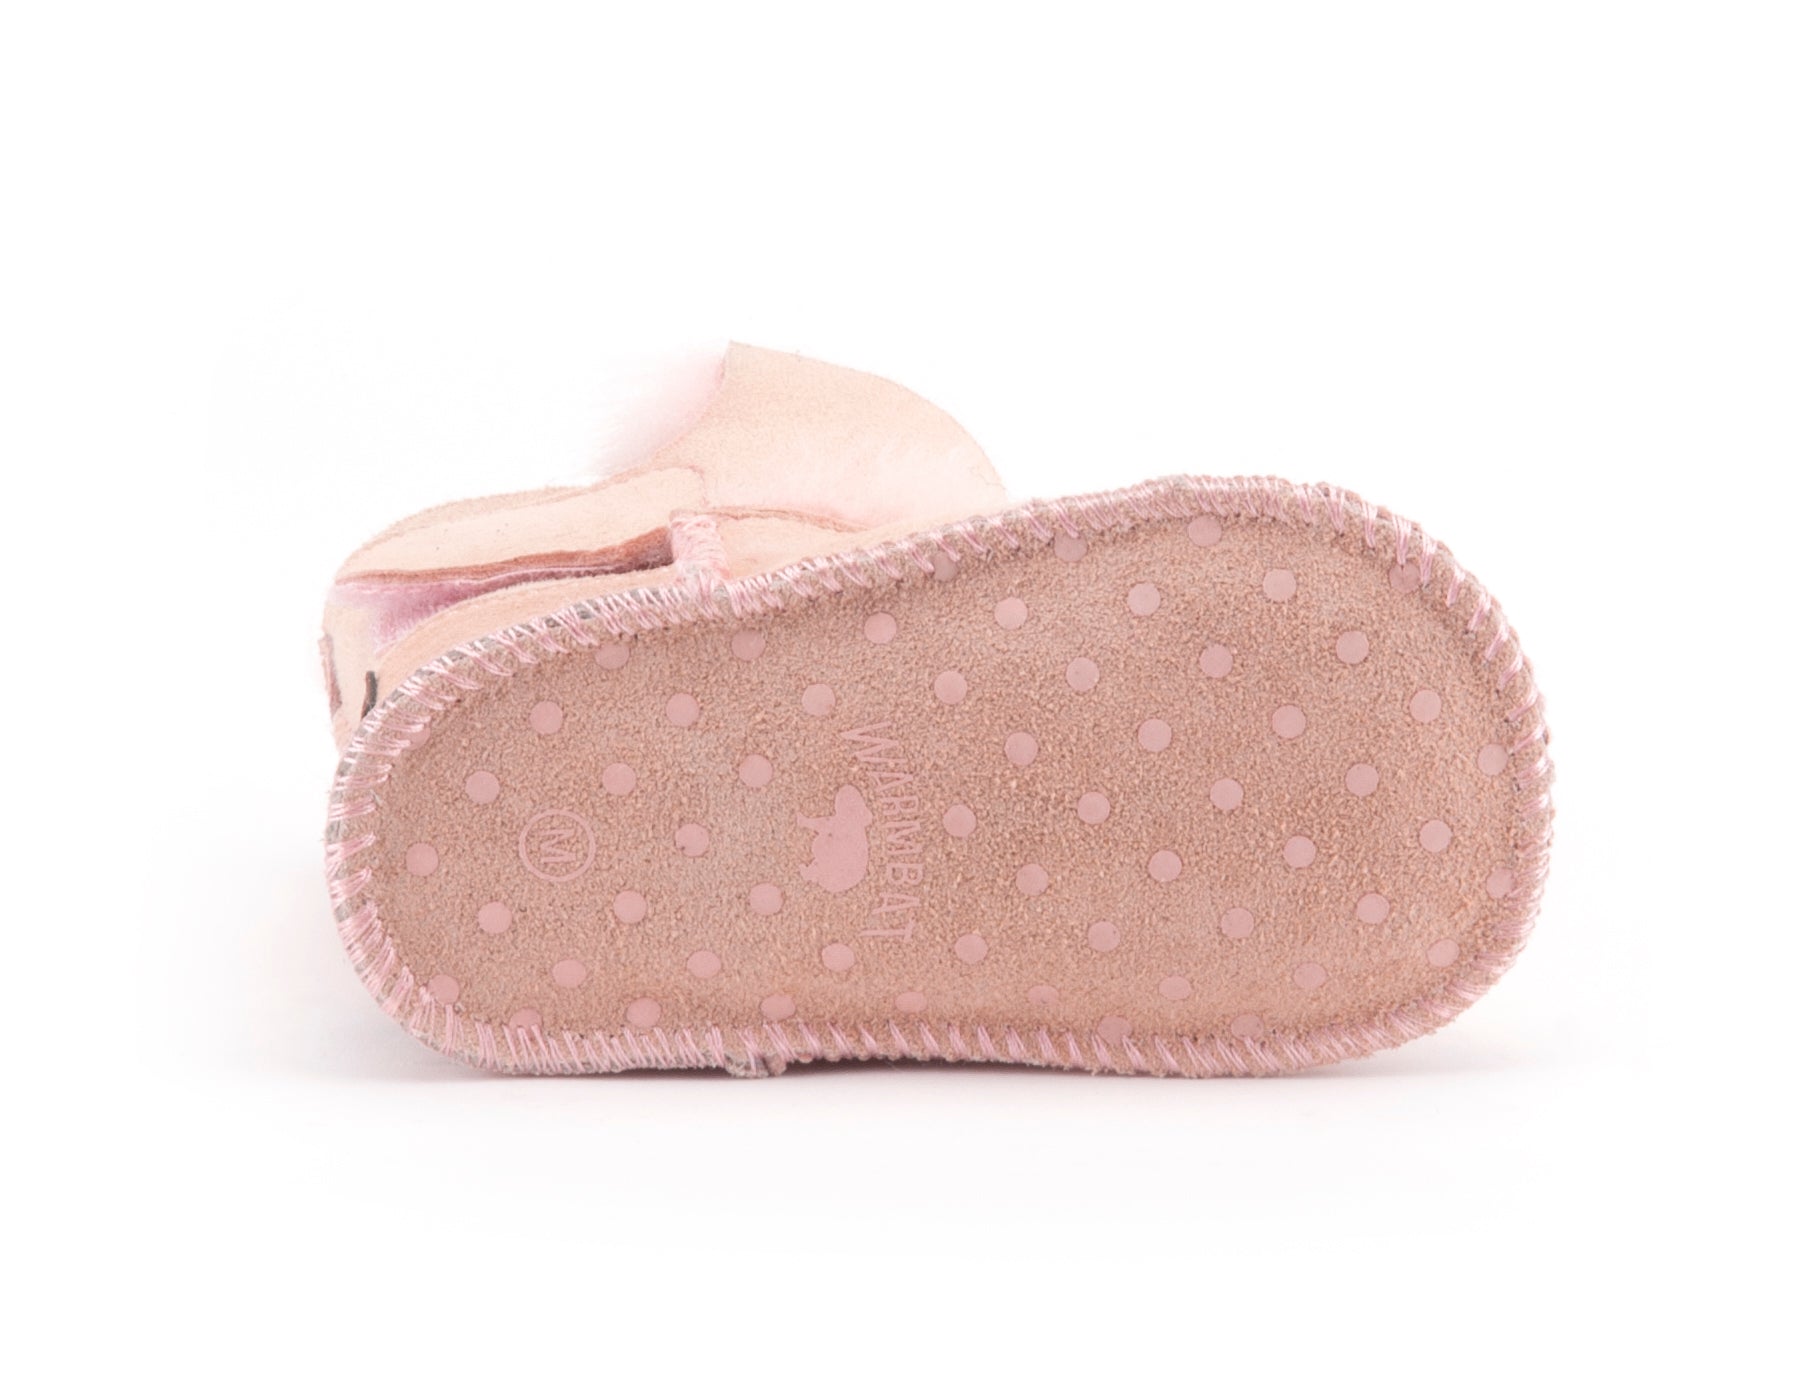 Warmbat Hay Baby bootie with velcro strap Dusty Pink